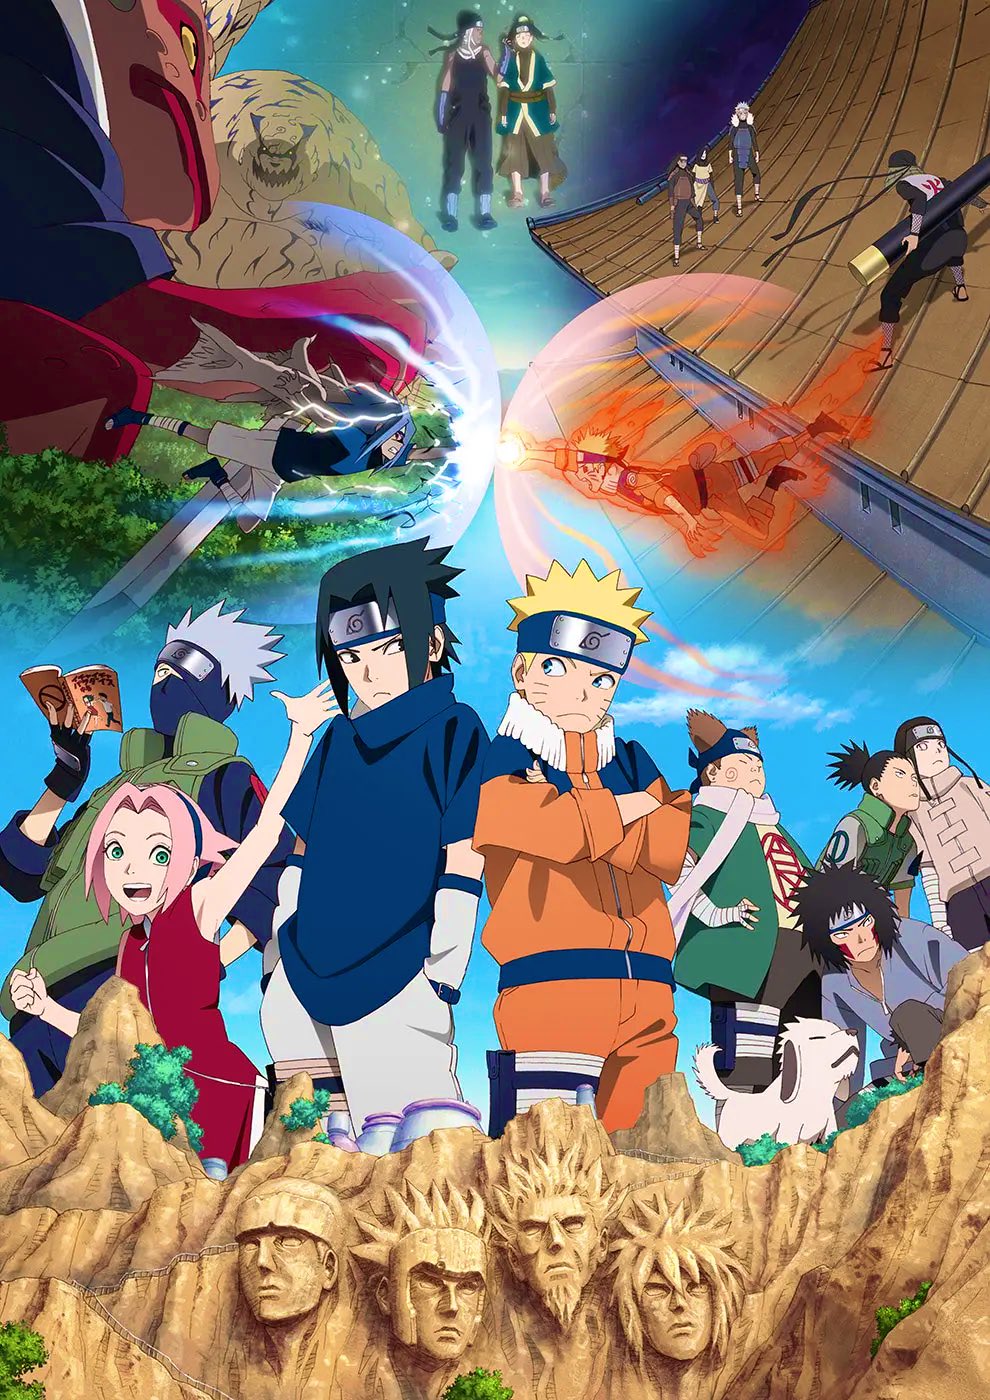 Naruto Officially Returns With 4 New Episodes